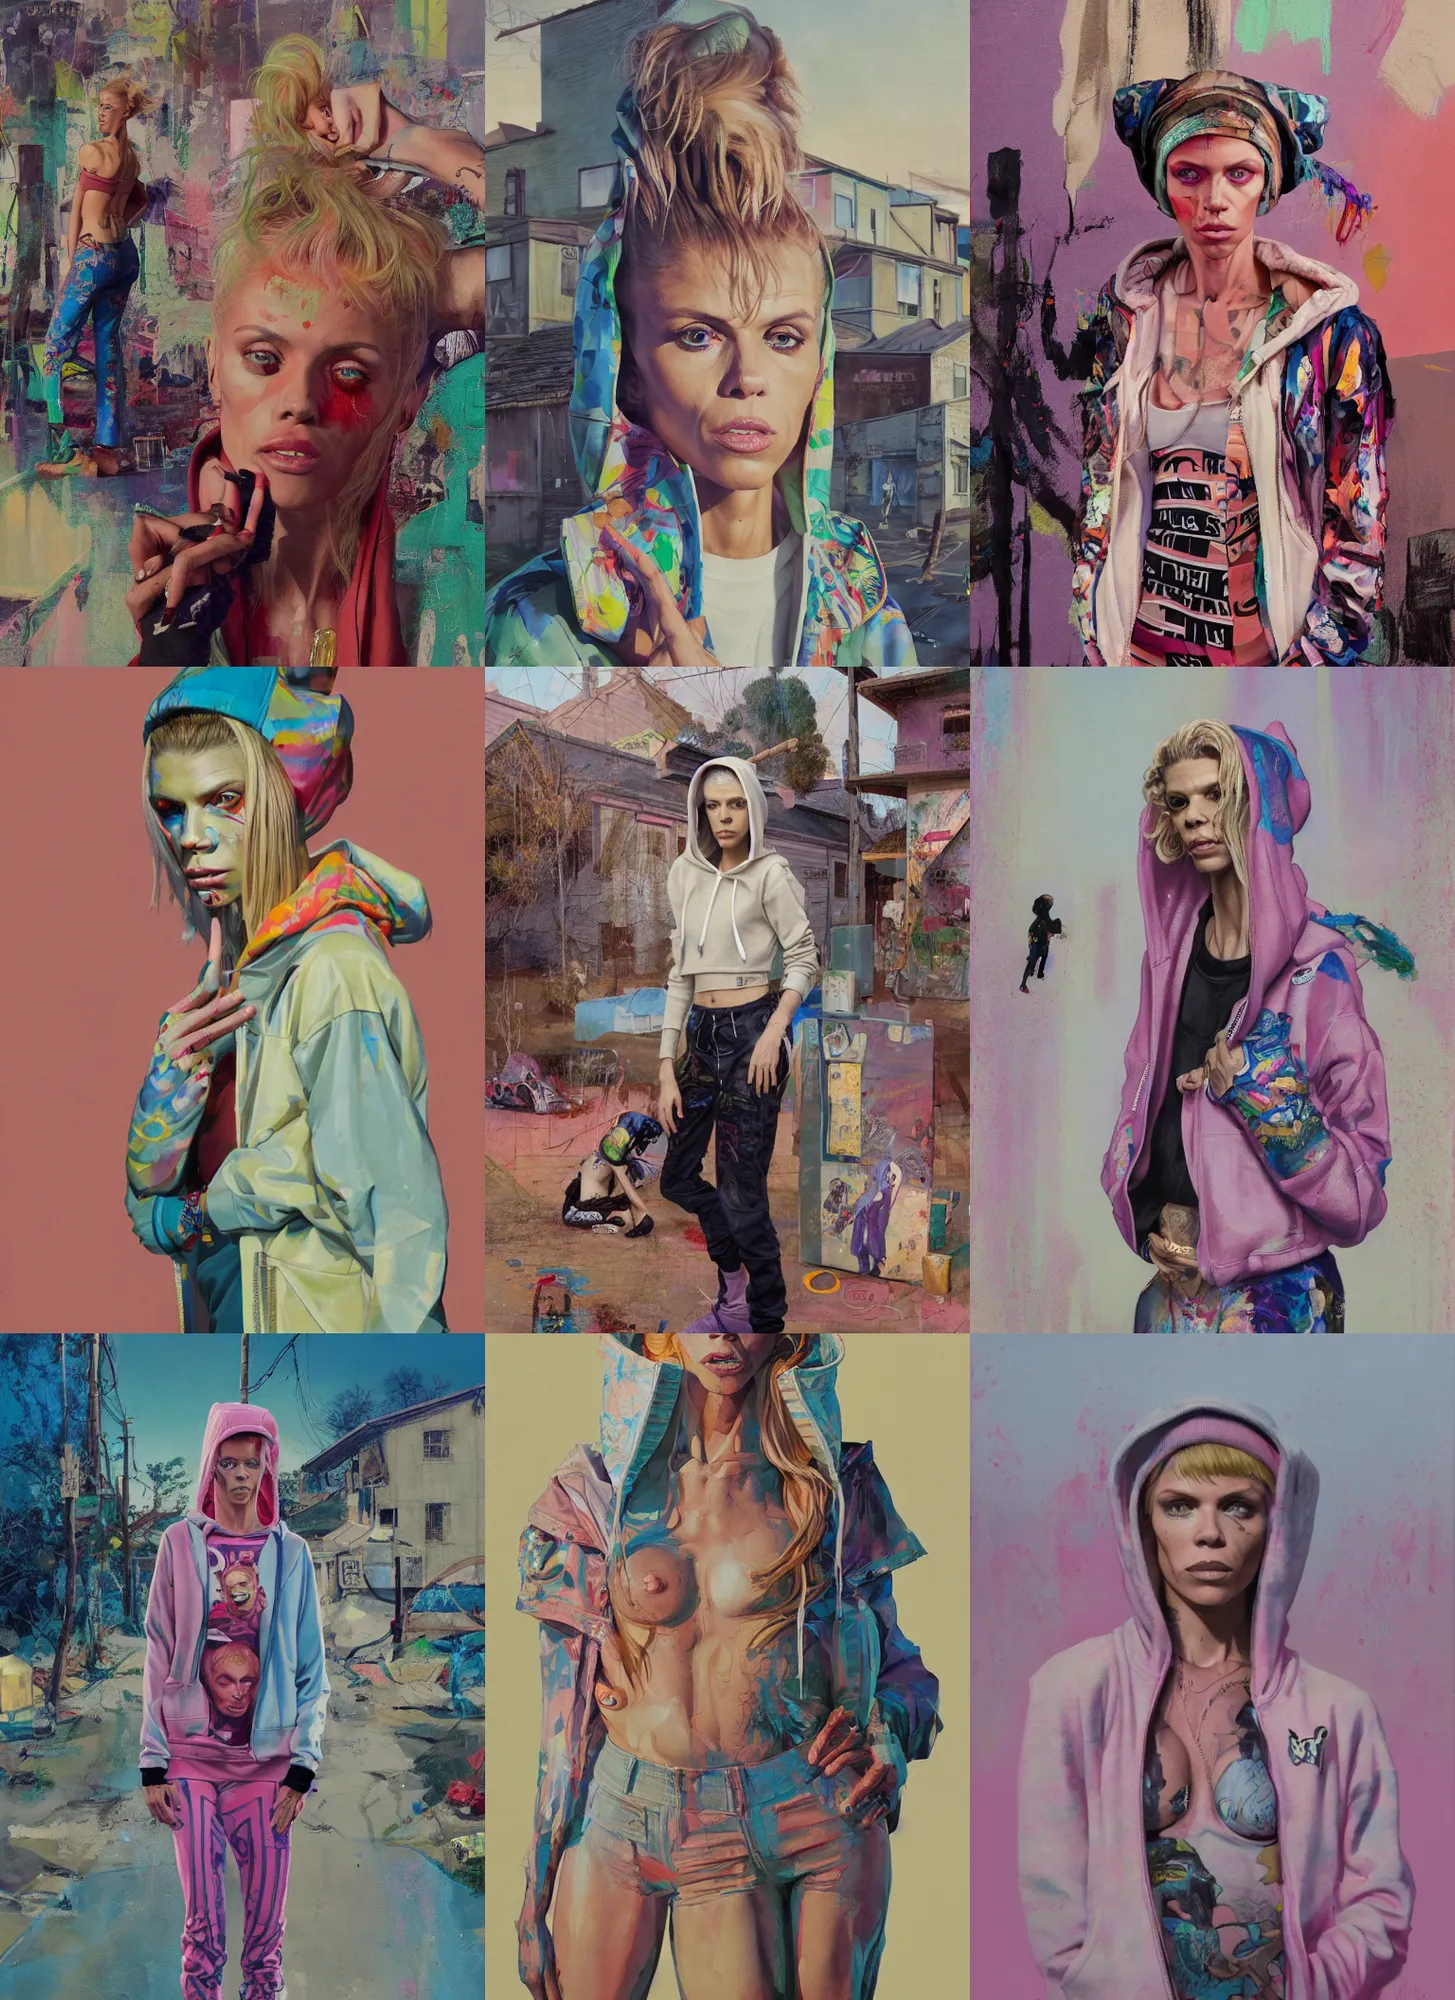 Prompt: still from music video of annalynne mccord from die antwoord standing in a township street, wearing a hoodie, street clothes, full figure portrait painting by njideka akunyili crosby and martine johanna, earl norem, ismail inceoglu, pastel color palette, 3 5 mm lens